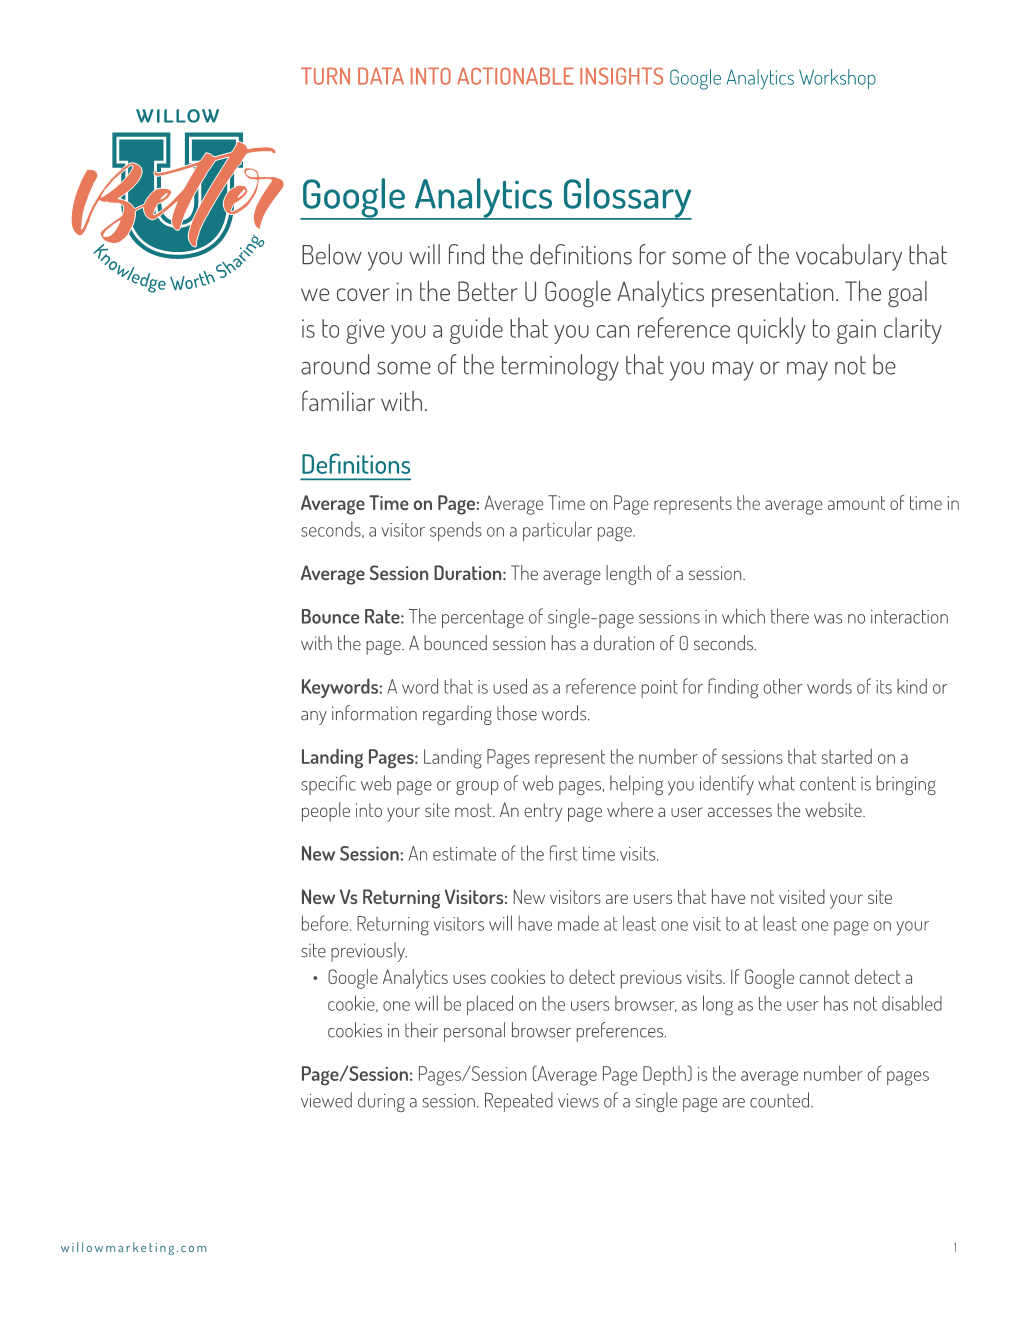 Google Analytics Glossary Below You Will Find the Definitions for Some of the Vocabulary That We Cover in the Better U Google Analytics Presentation